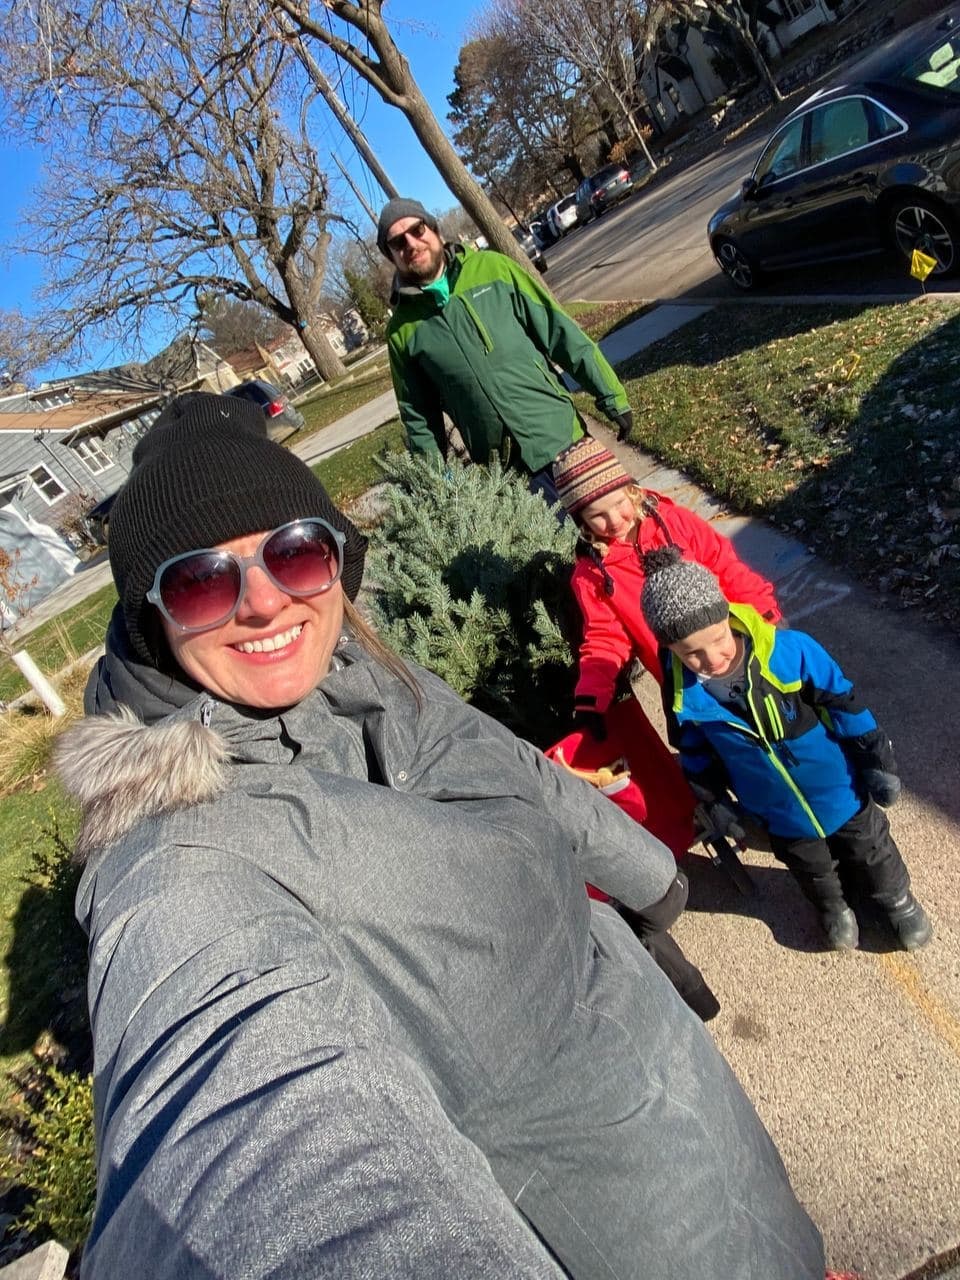 We continued our tradition this year - walked our Christmas tree home from a local coffee shop the day after Thanksgiving.